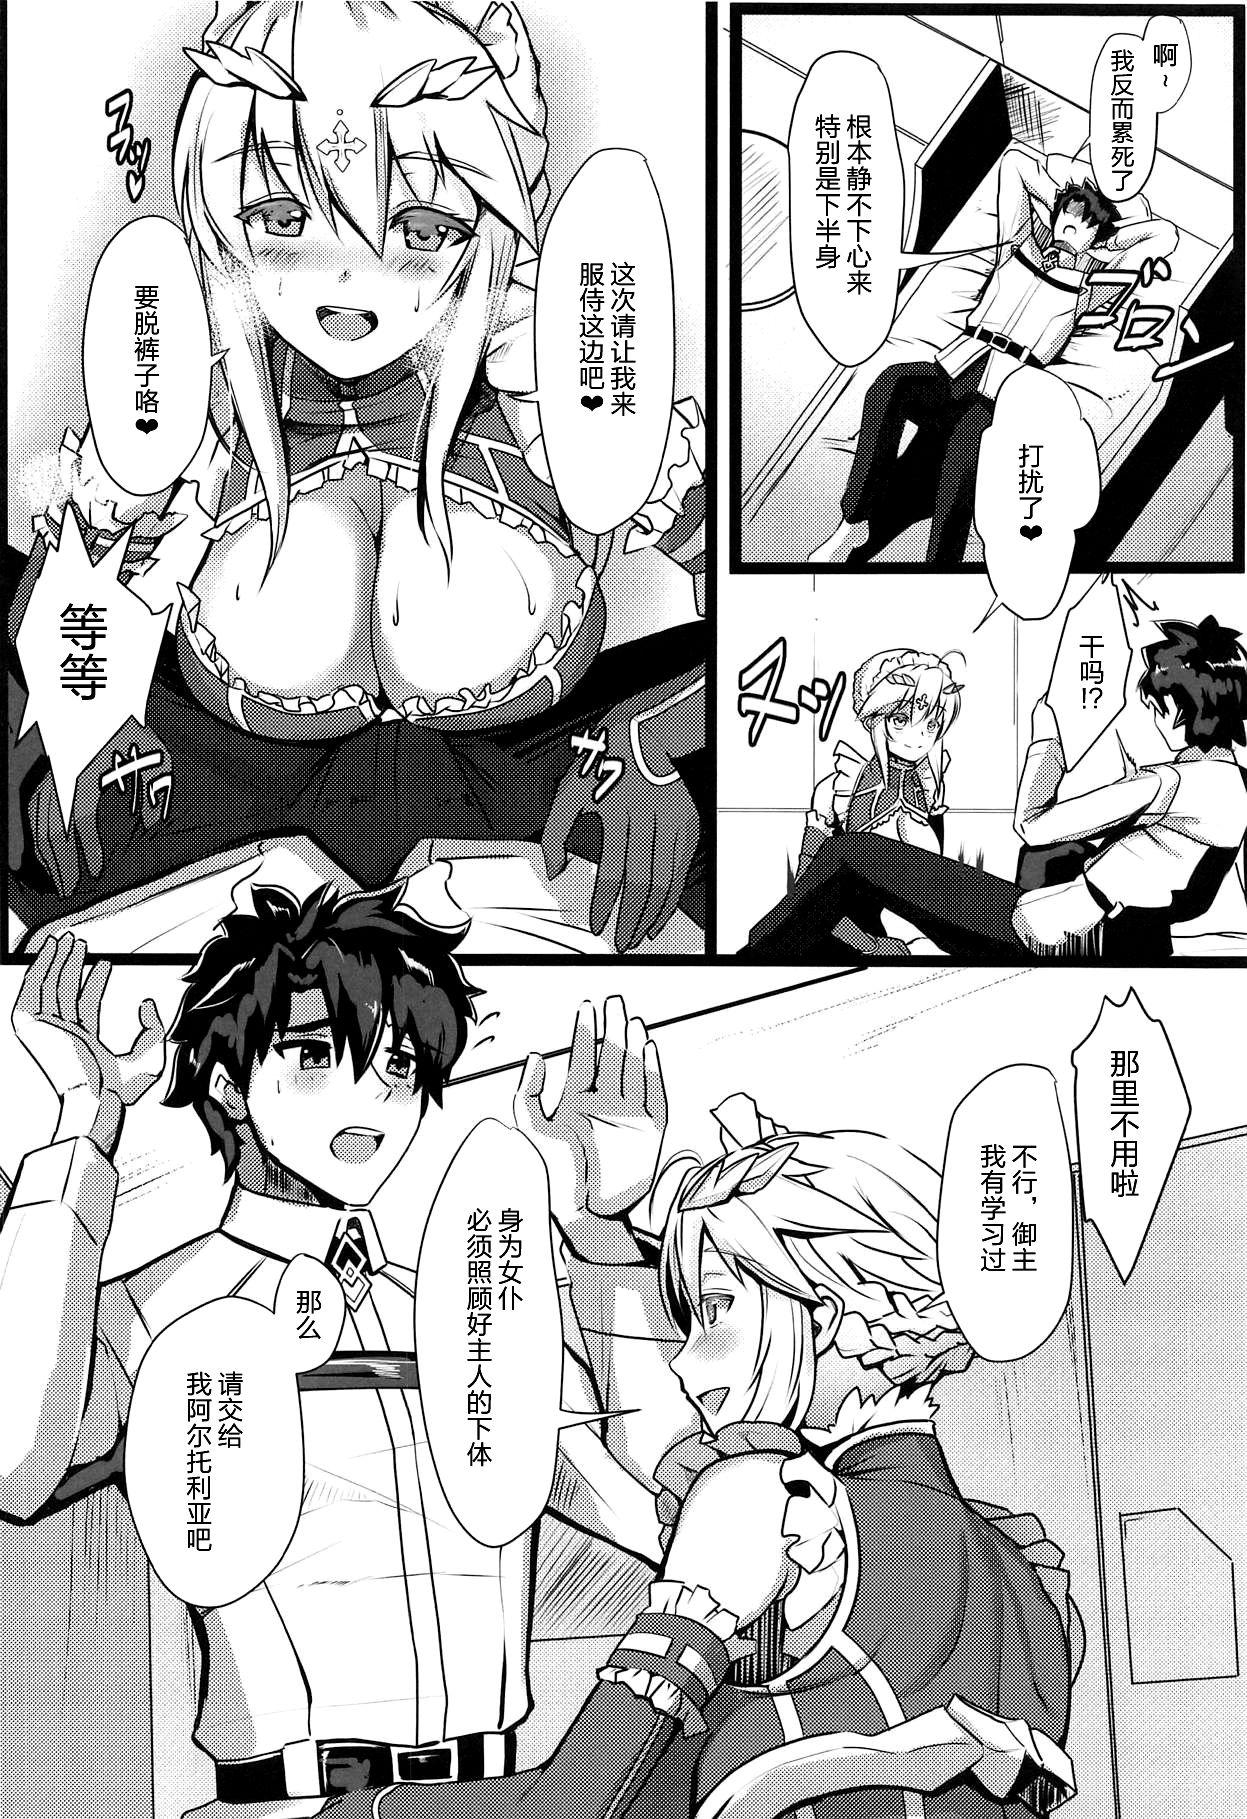 Spread Chichiue Maid Gohoushi Kyouka Quest - Fate grand order Point Of View - Page 7